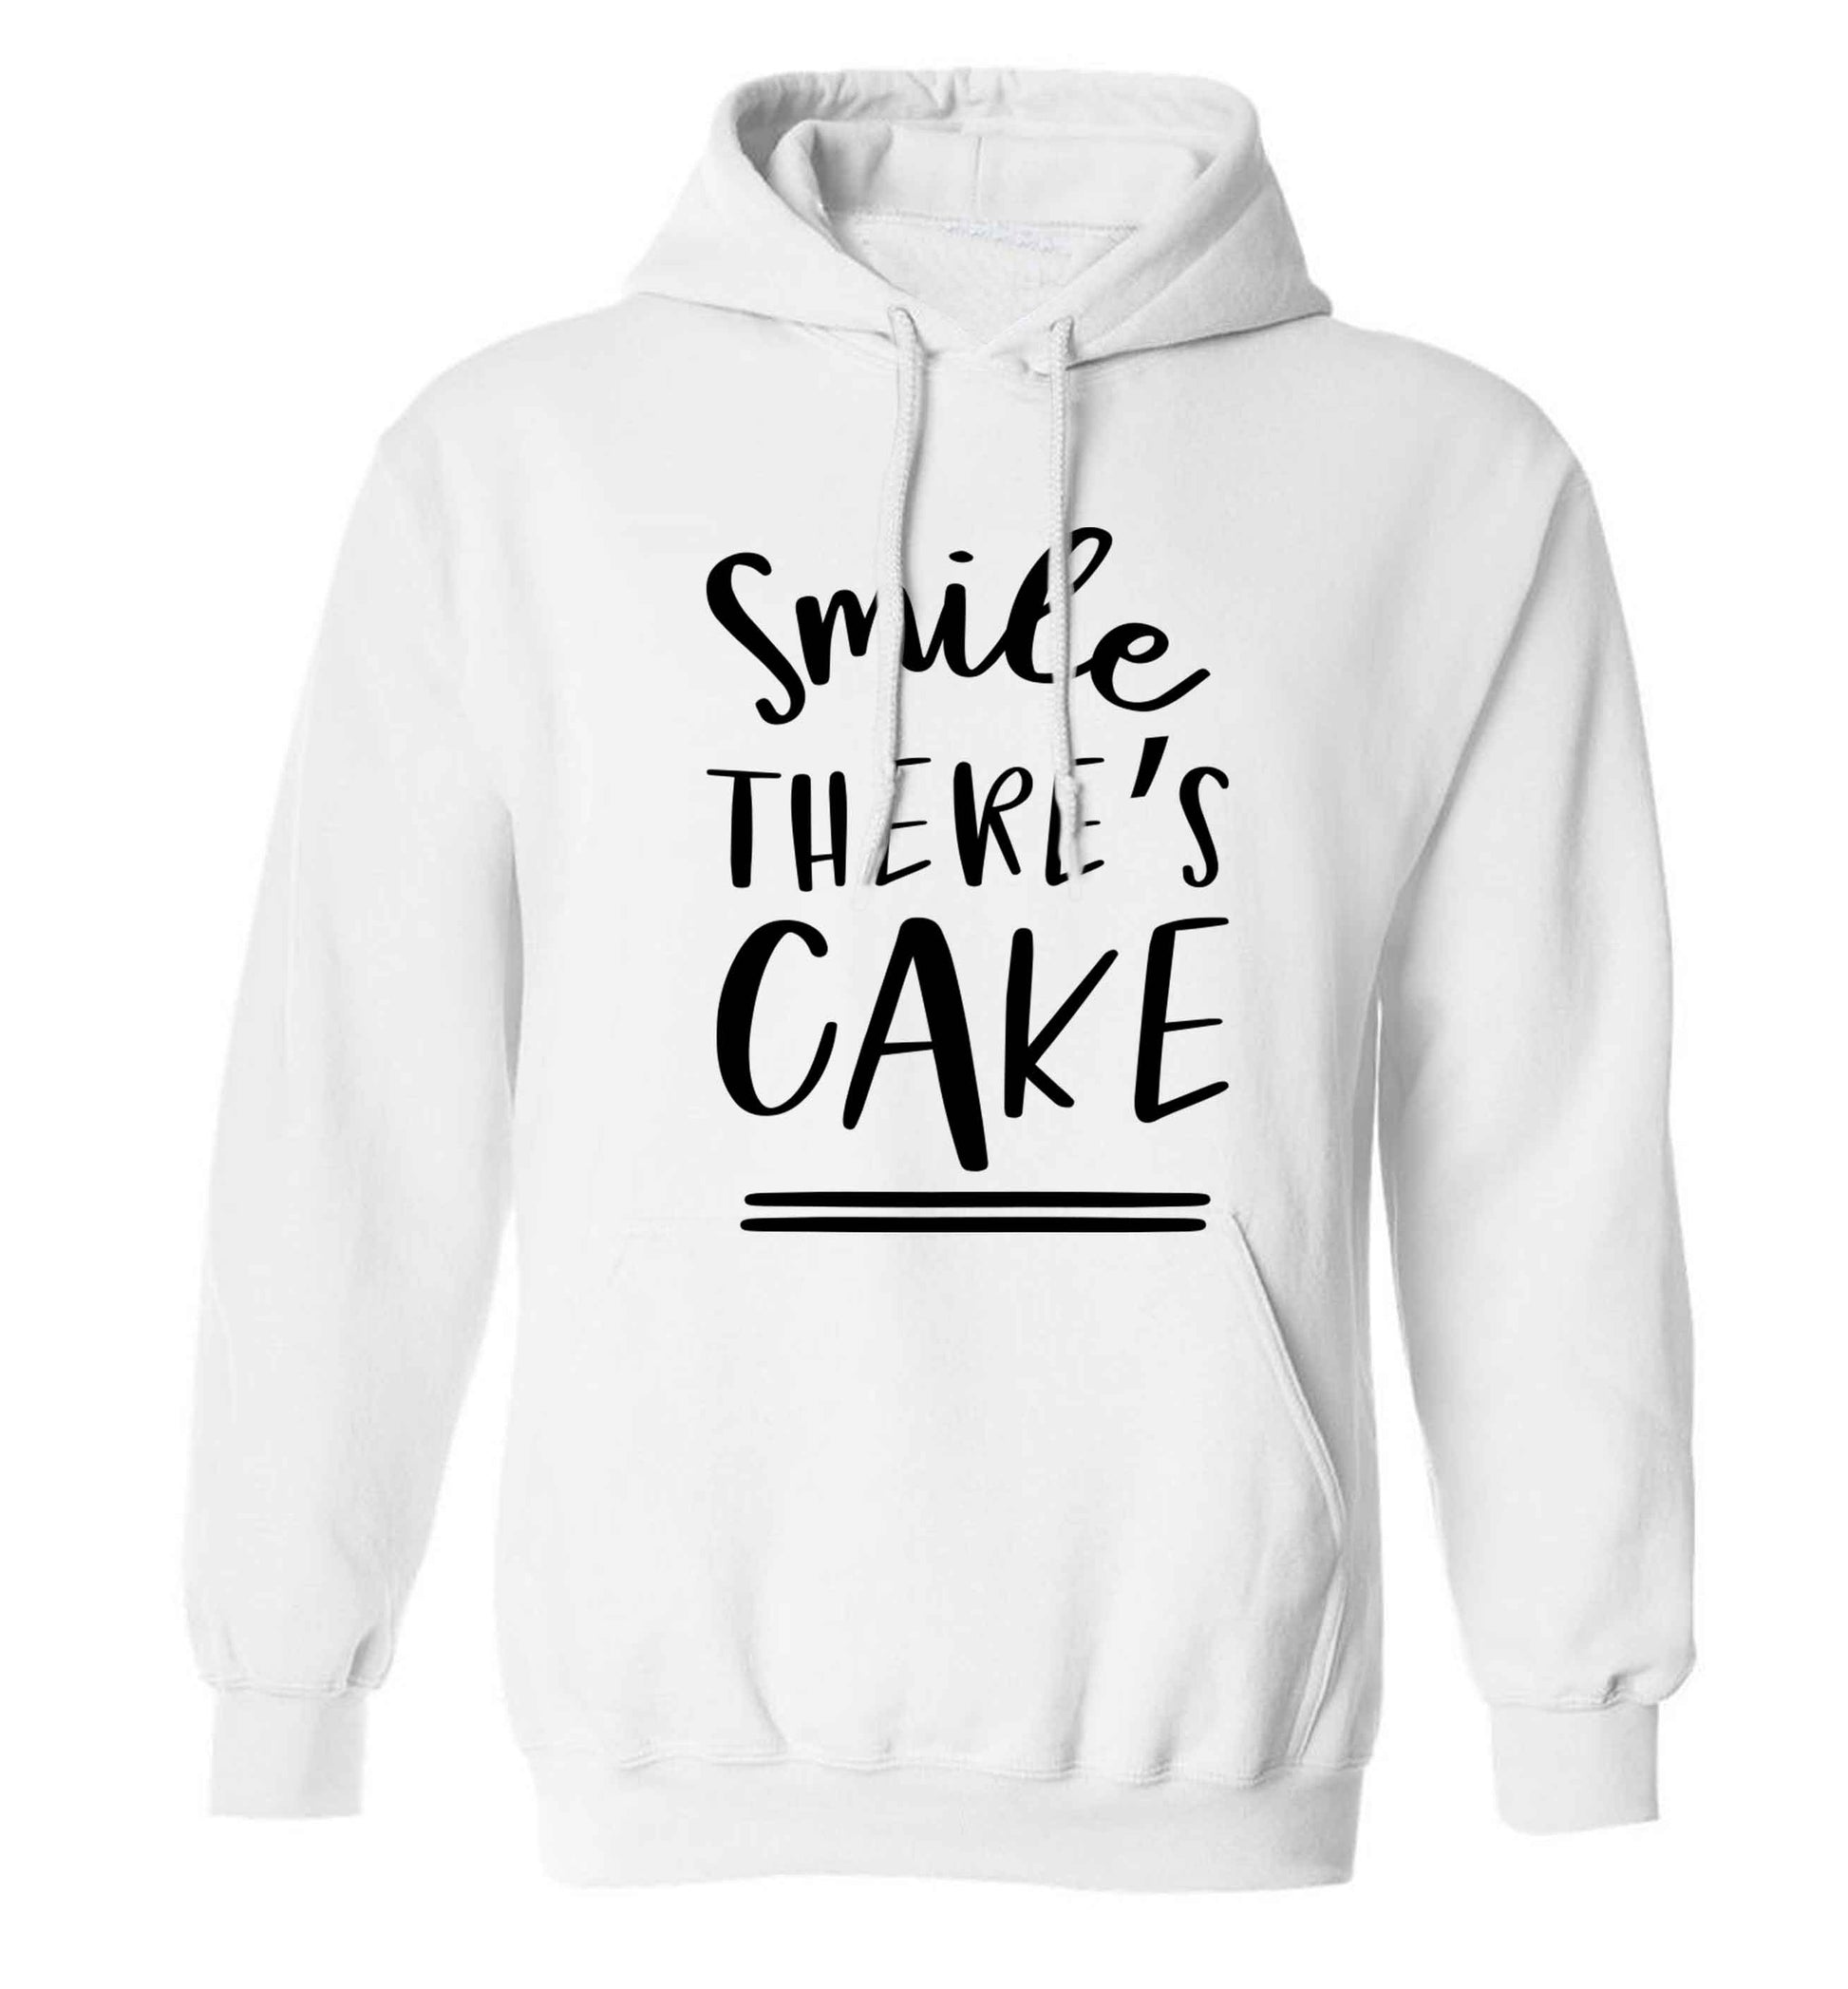 Smile there's cake adults unisex white hoodie 2XL